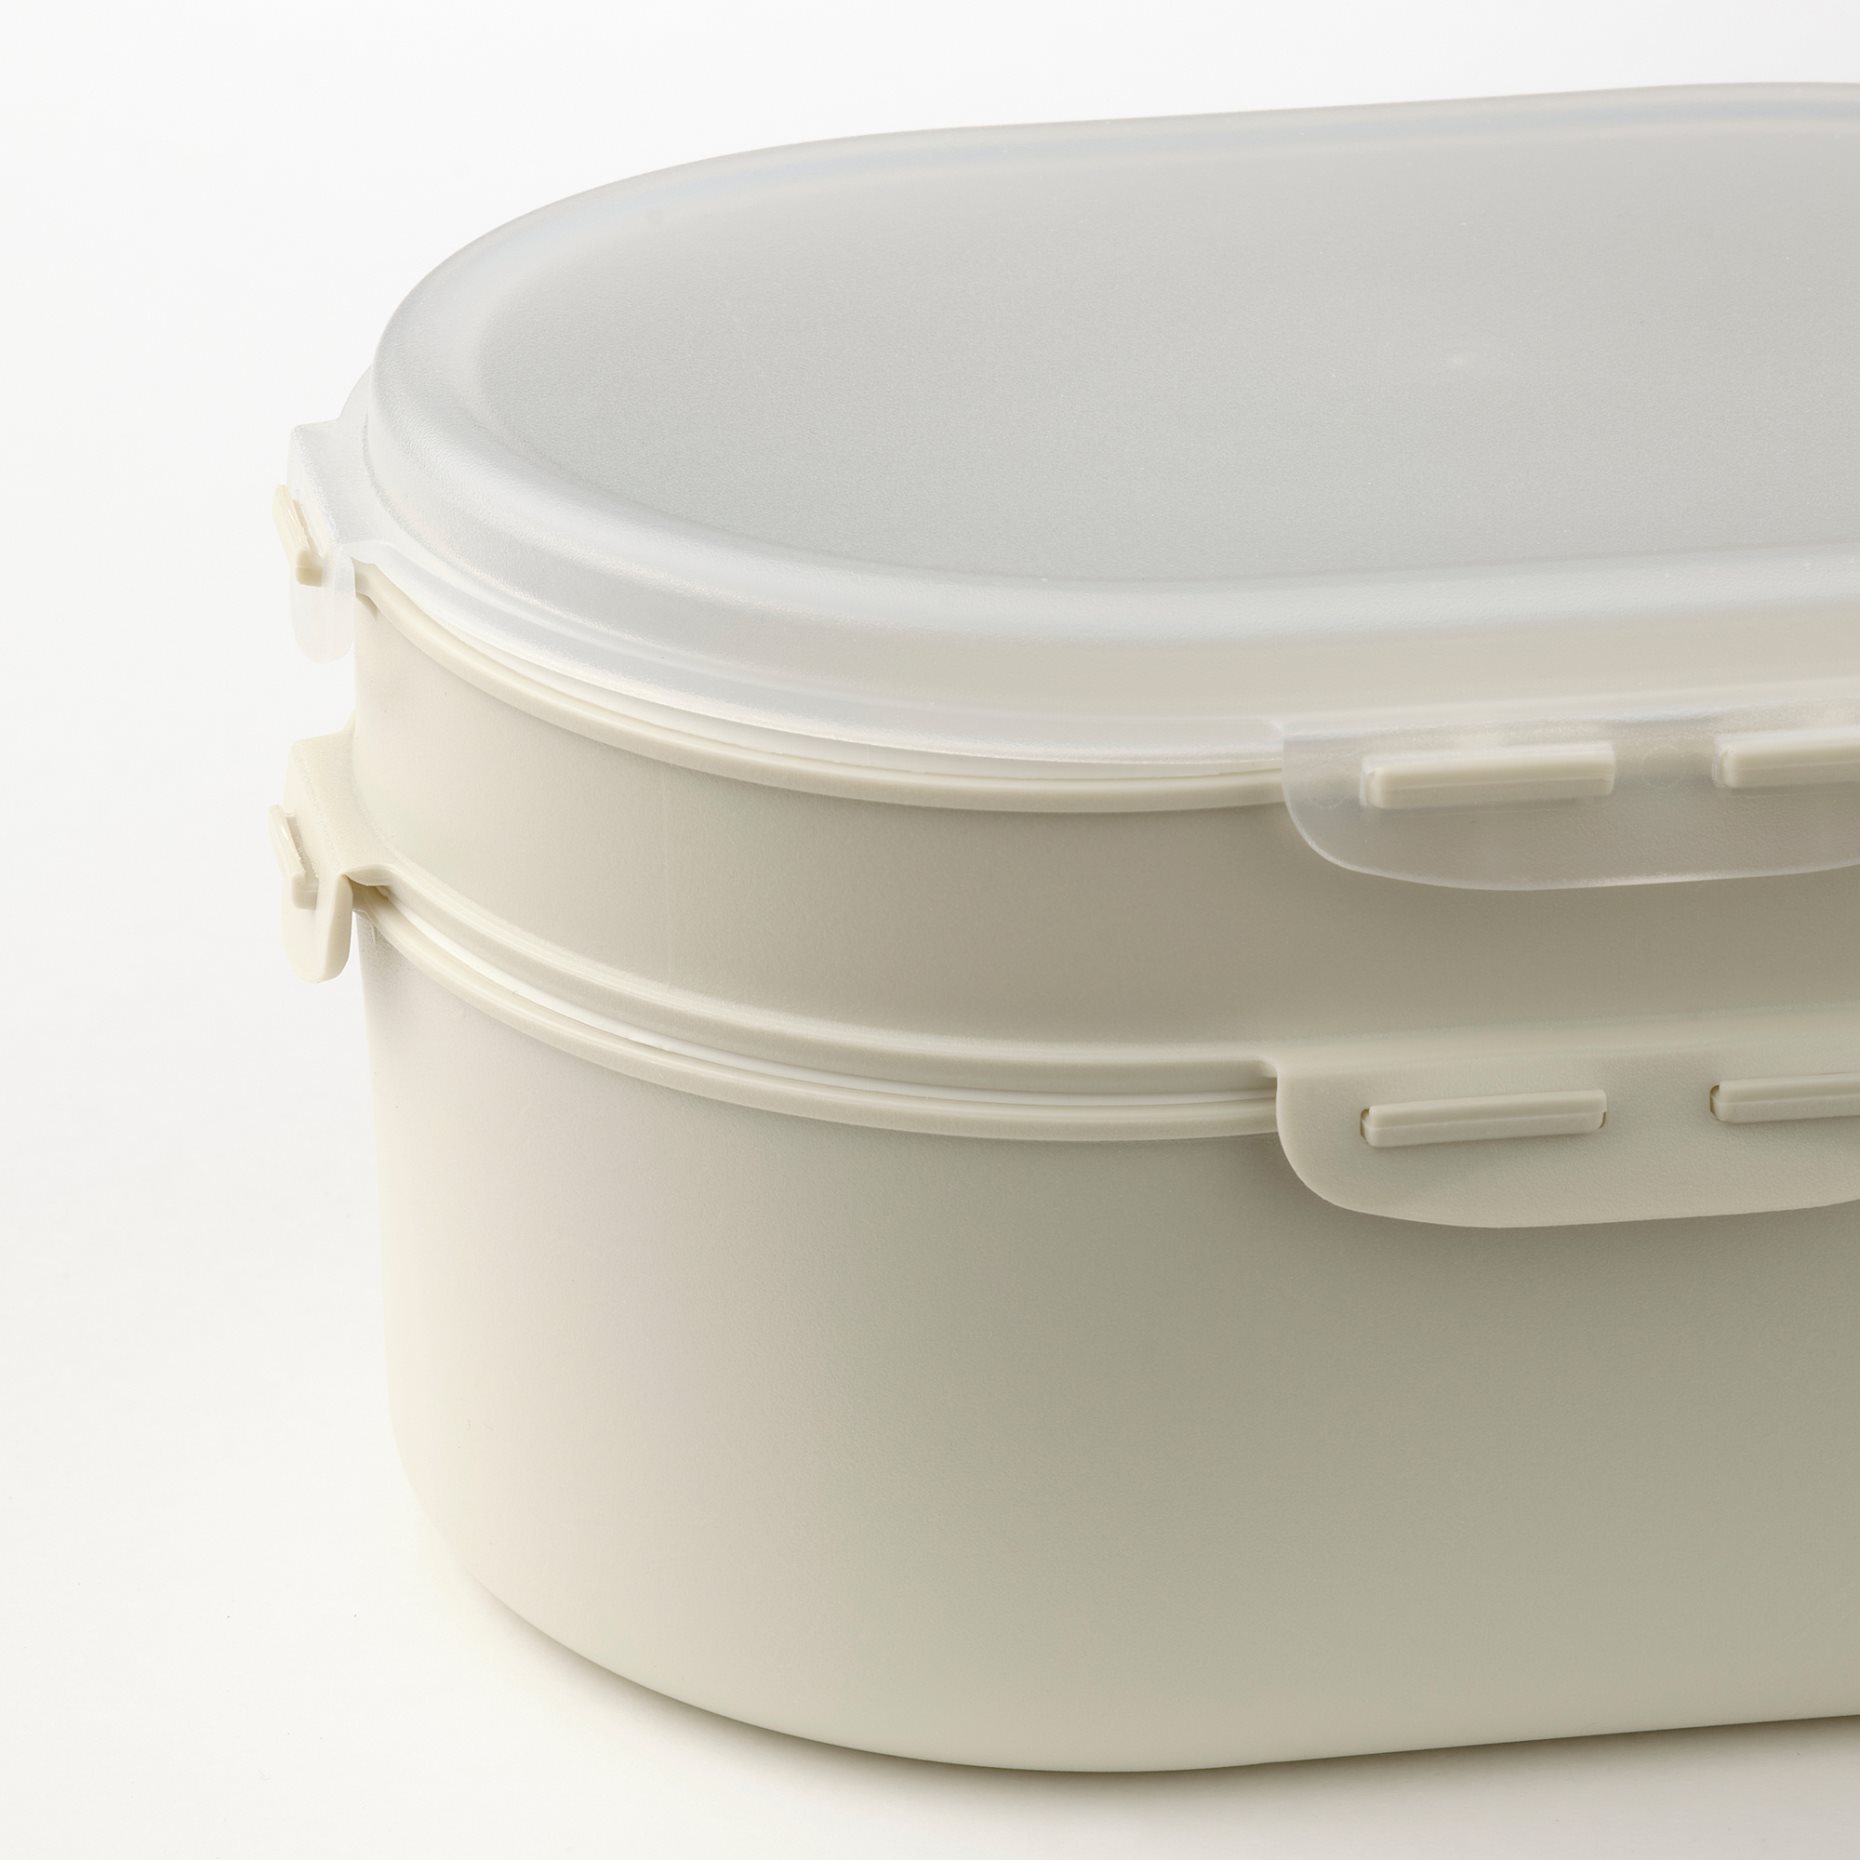 UTBJUDA, stackable lunch box for dry food, 005.186.58